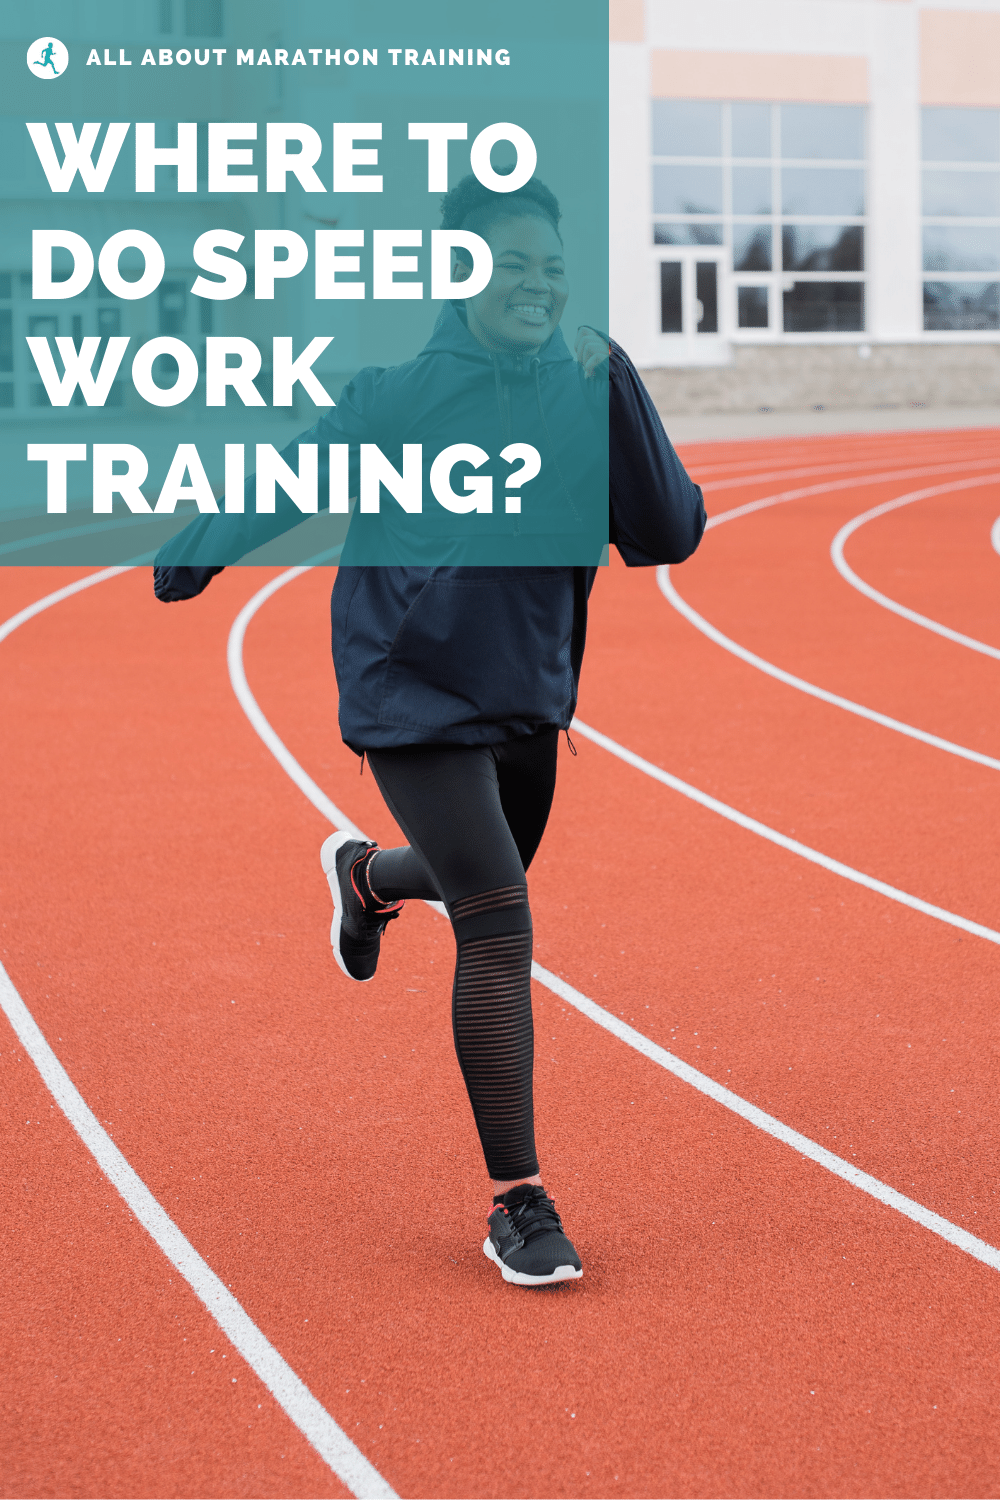 High Intensity Speed Training Can Improve Your Marathon Time